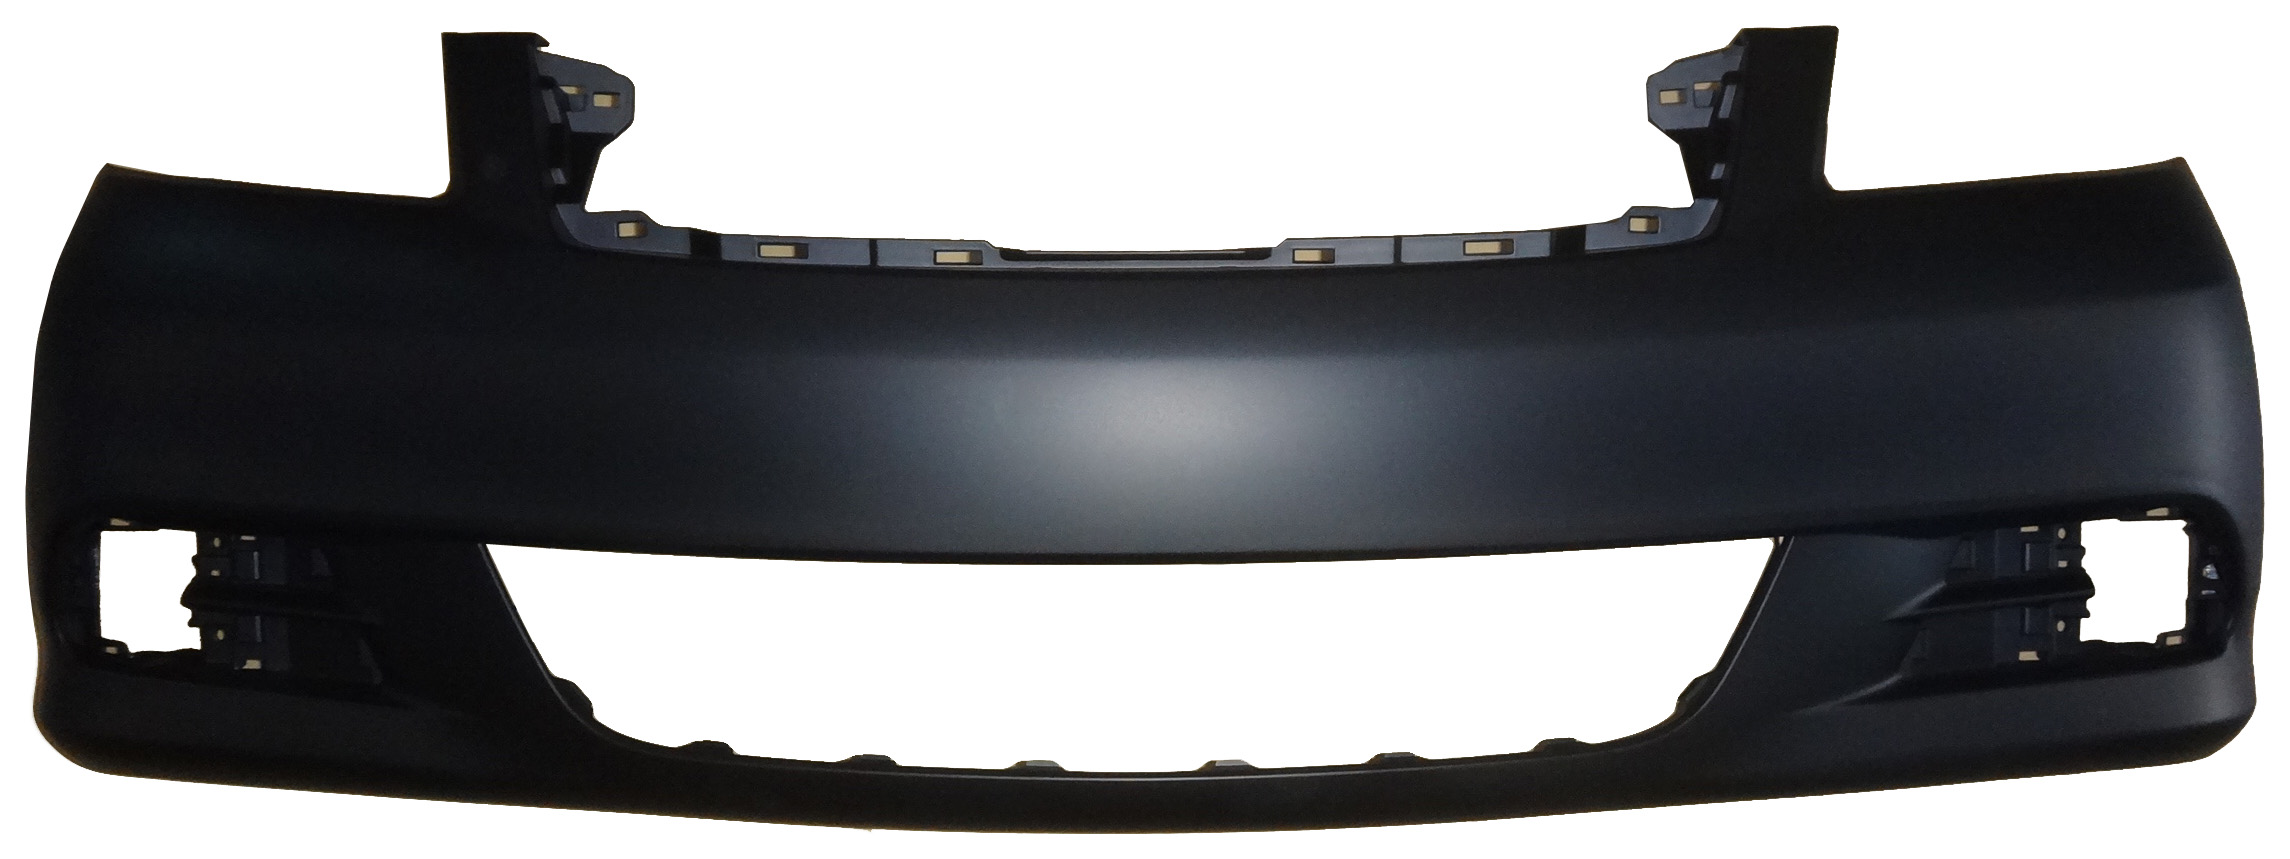 Aftermarket BUMPER COVERS for INFINITI - M35, M35,08-10,Front bumper cover